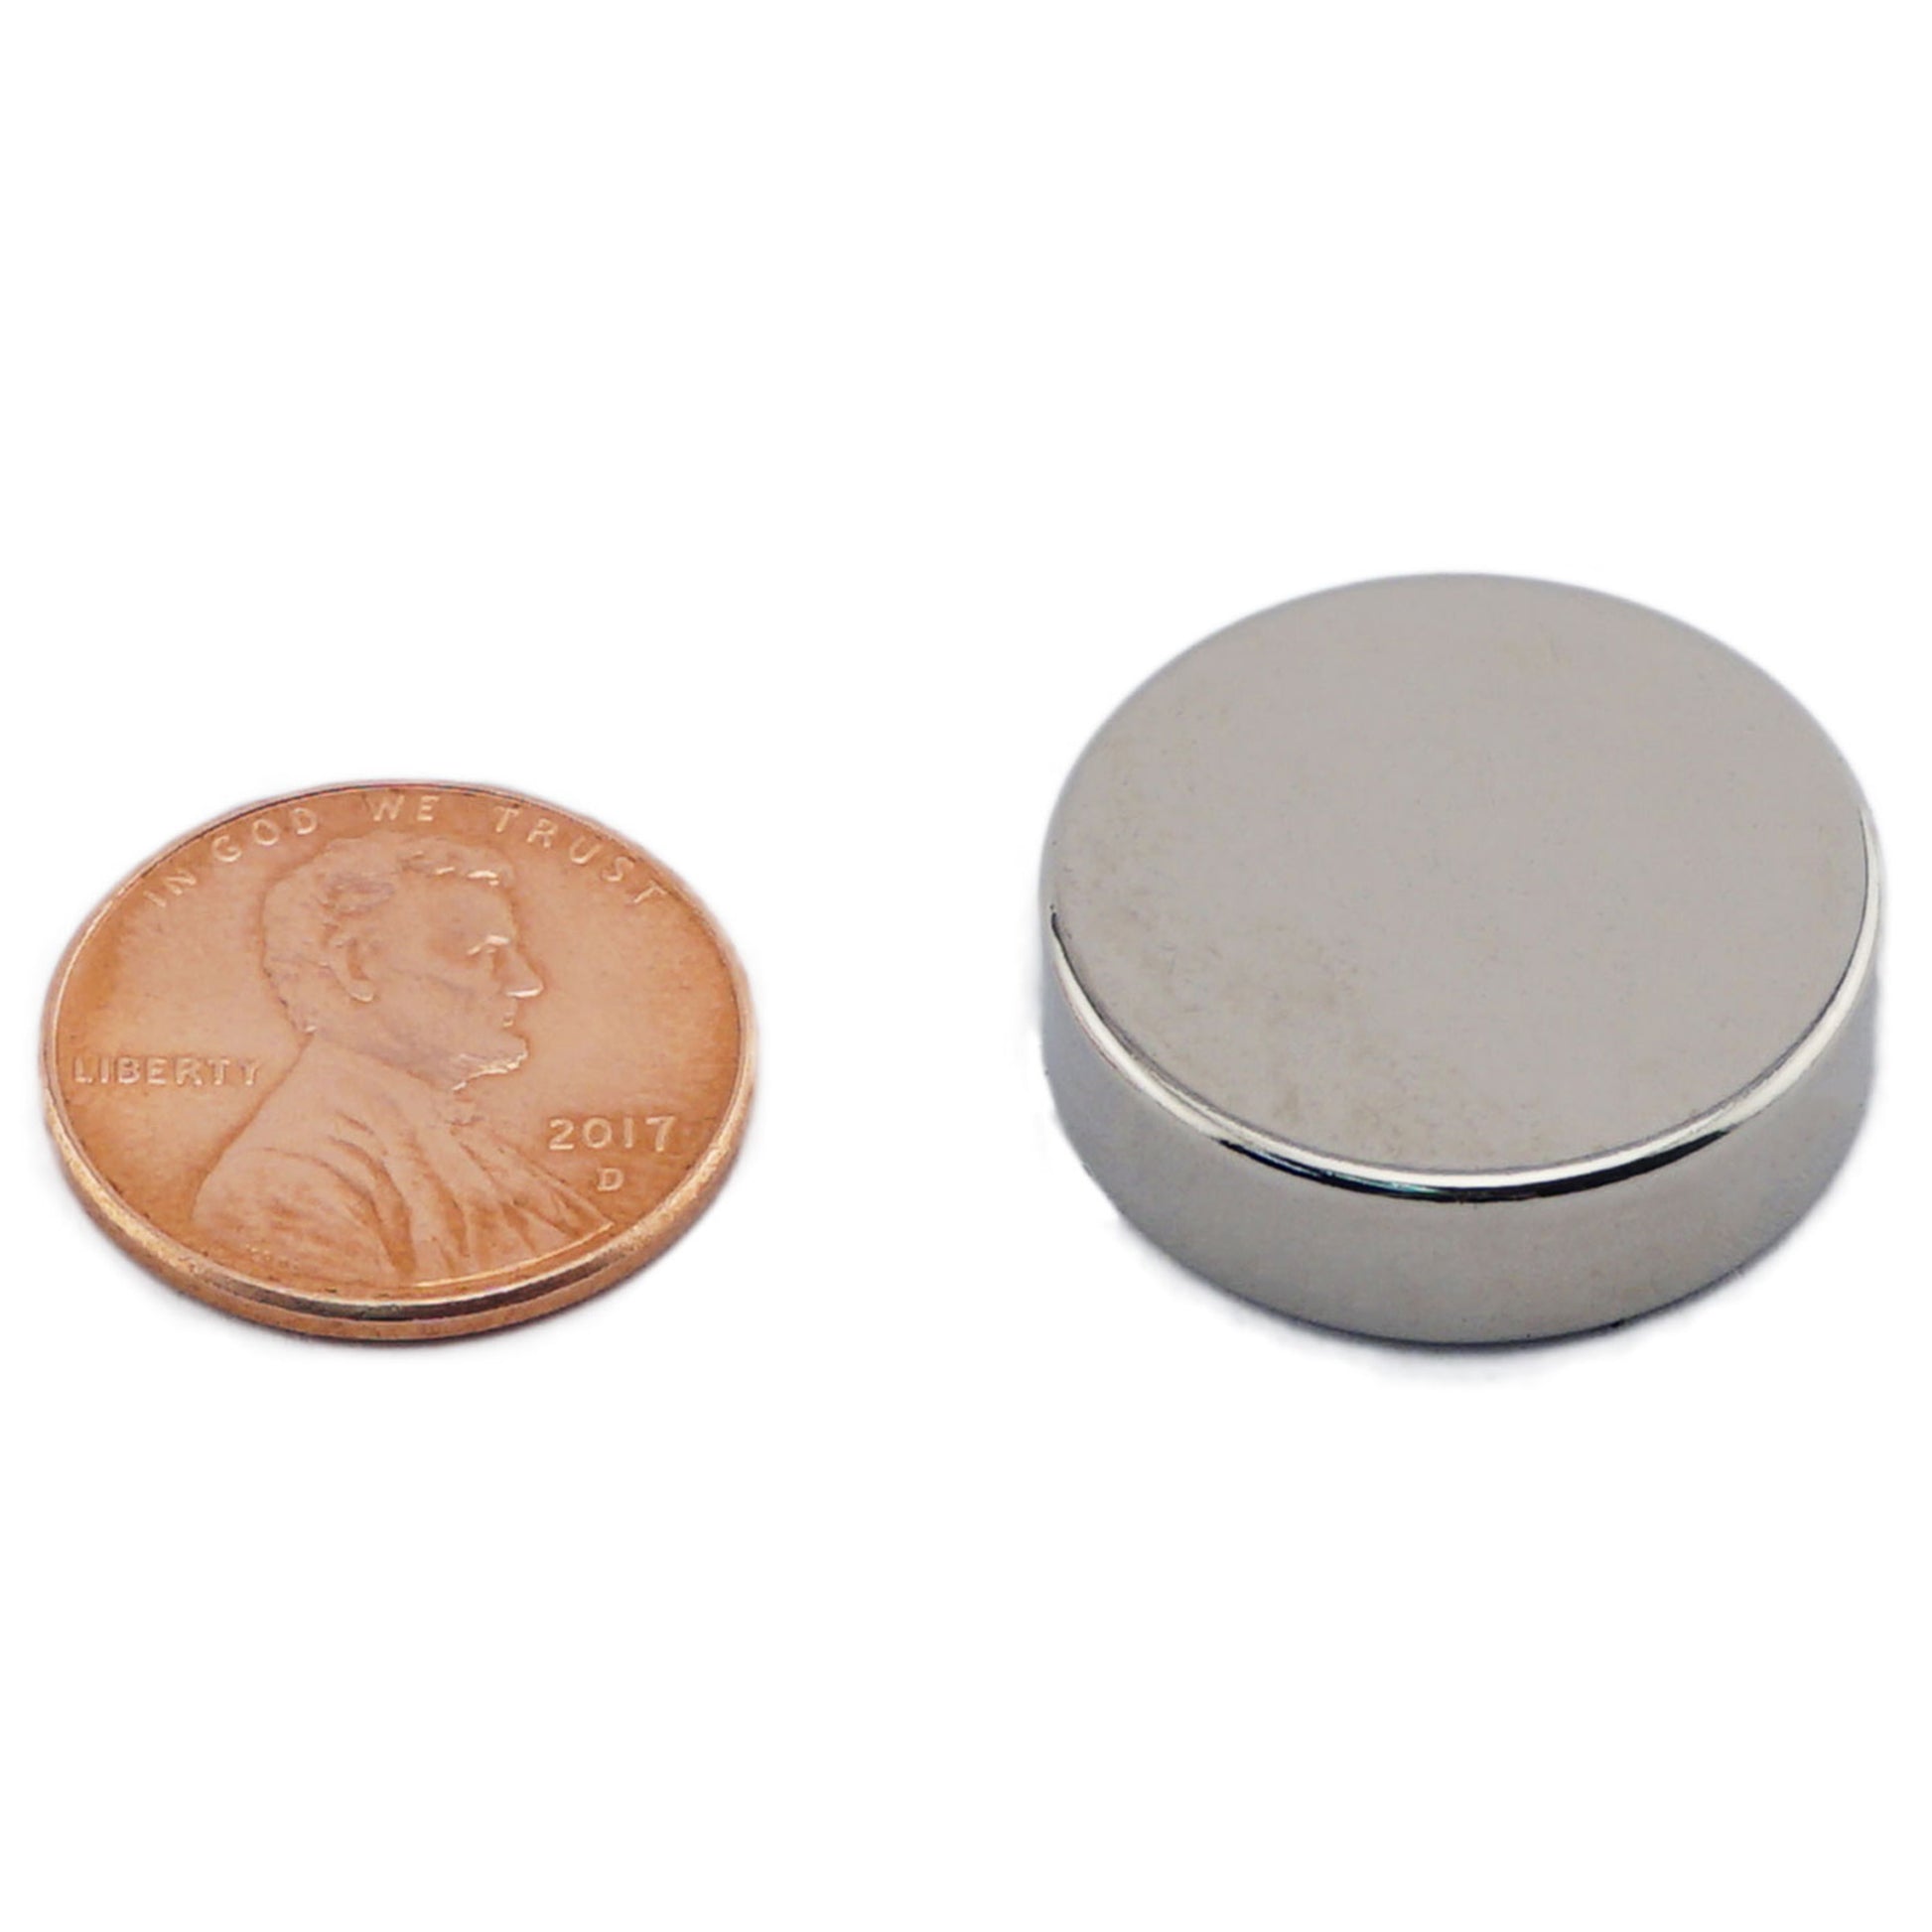 Load image into Gallery viewer, ND008708N Neodymium Disc Magnet - Compared to Penny for Size Reference